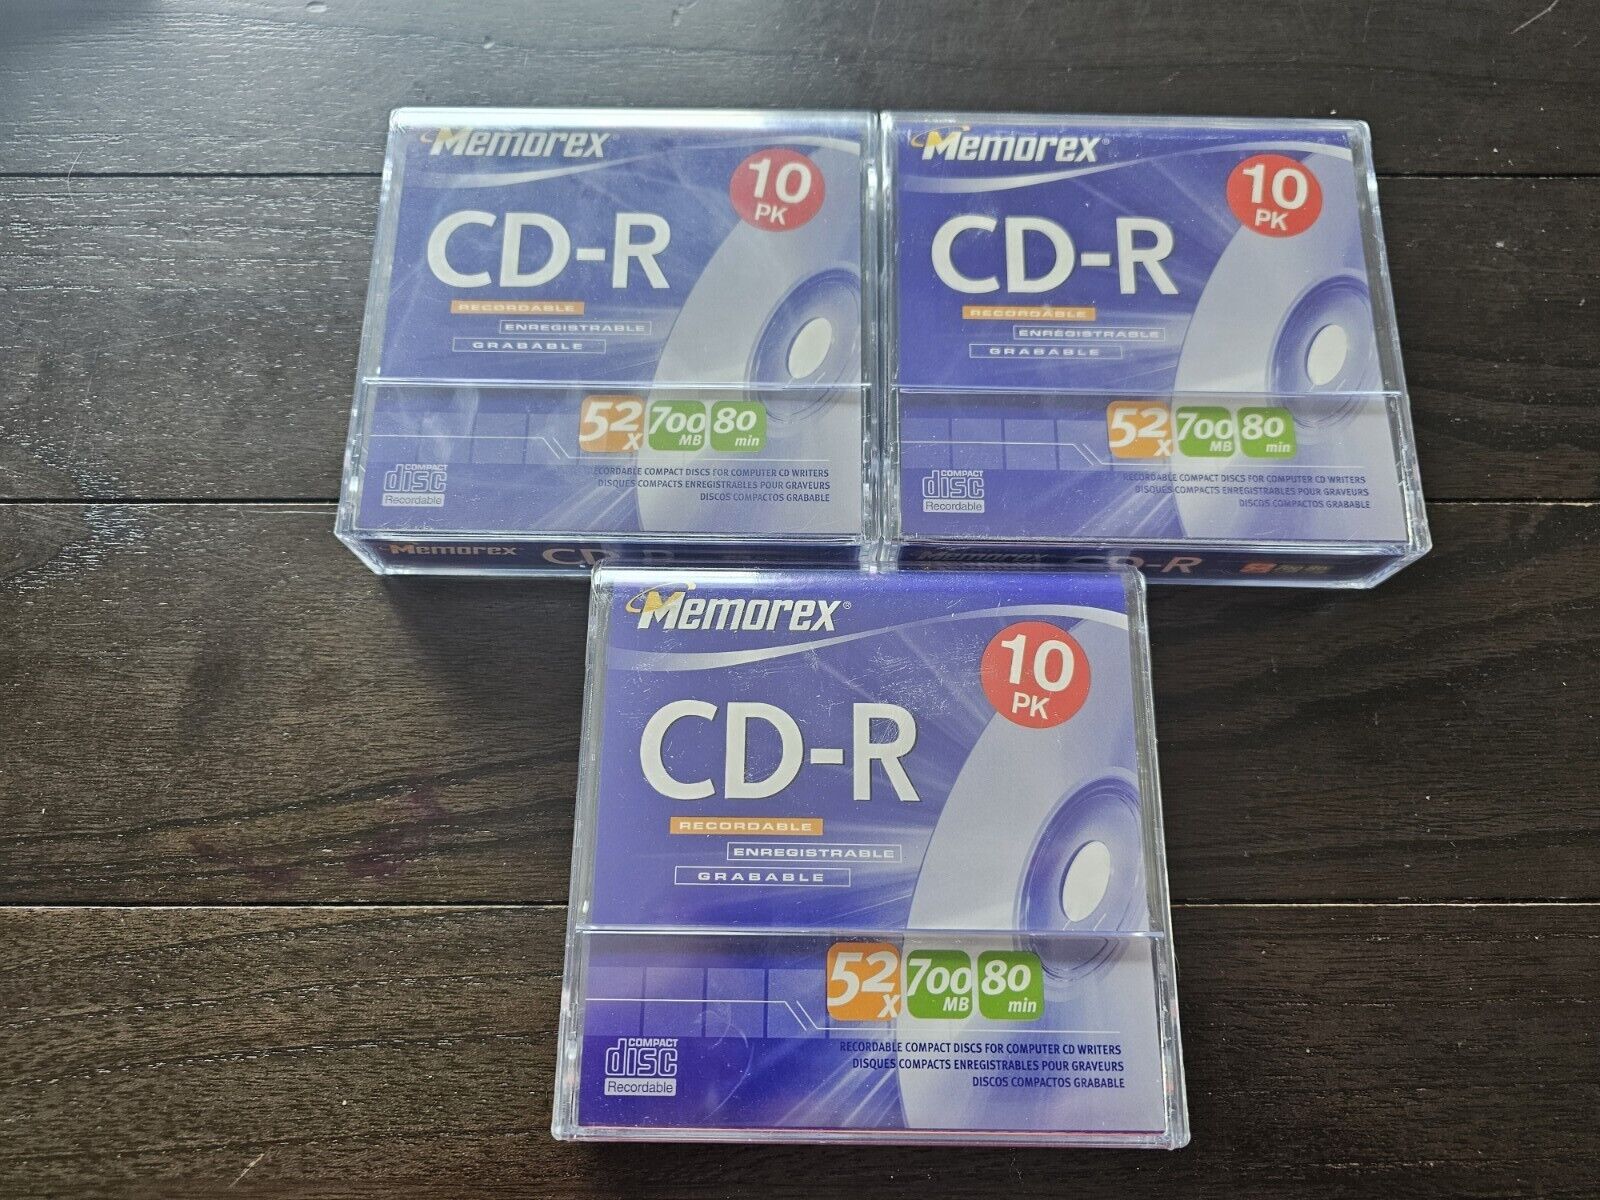 Memorex CD-R, 52x, 700MB, 80 Min, 10 Pack Recordable CD ROM, 3 Packages, Sealed